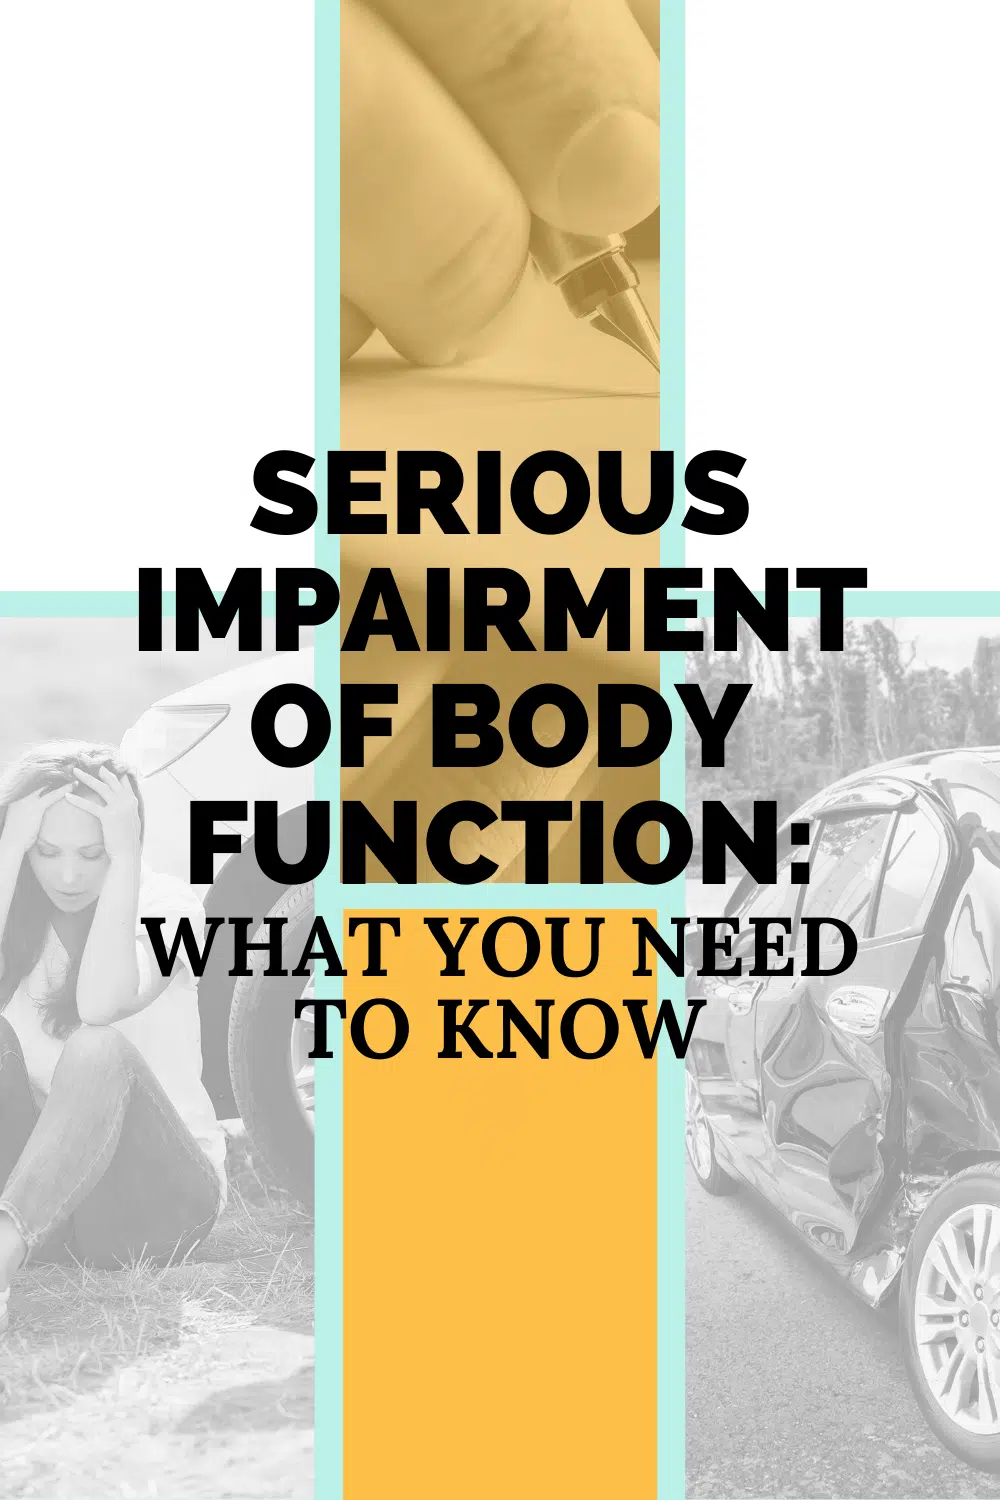 Serious Impairment of Body Function: What You Need To Know